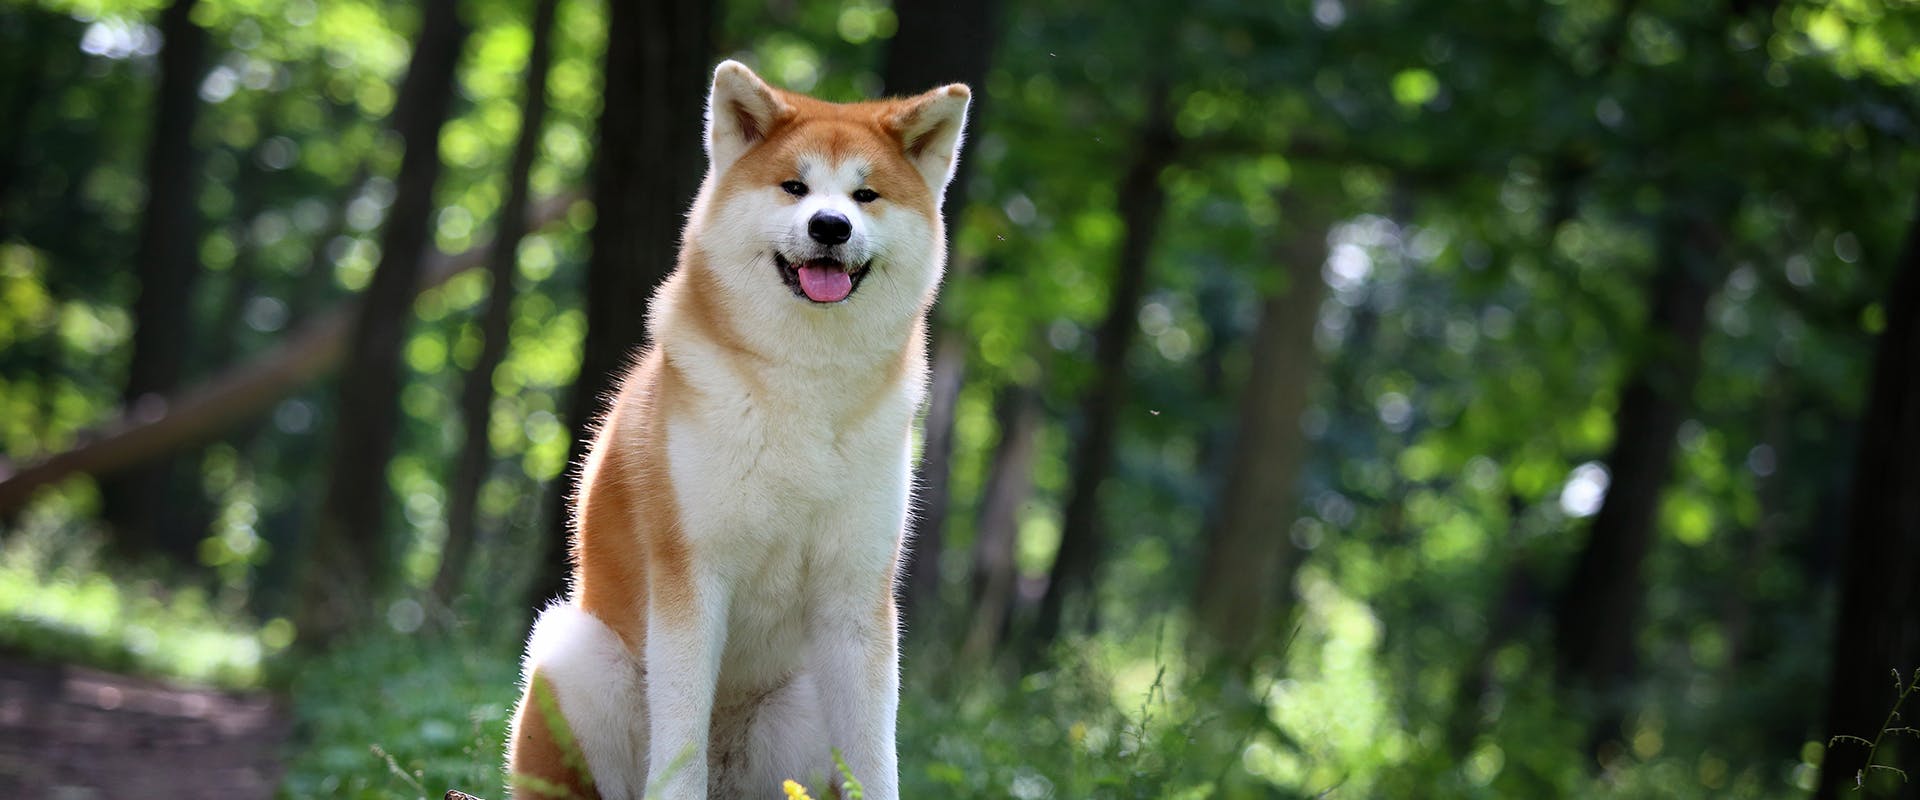 A Japanese Akita dog standing in the forest